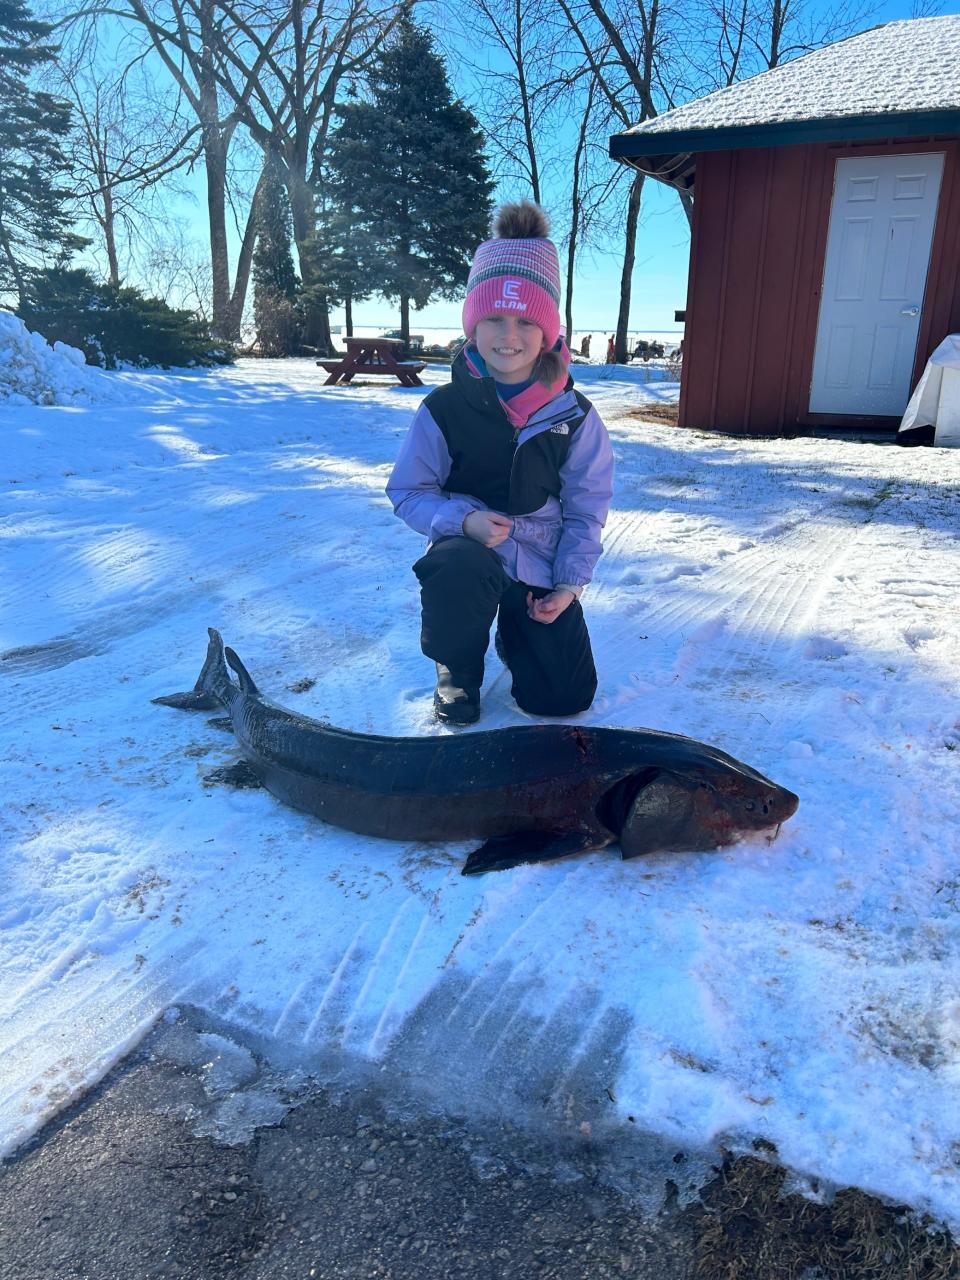 Elizabeth Meyer, 12, of Fond du Lac, posing with the first sturgeon she had ever caught outside Jim and Linda's Supper Club in Pipe.